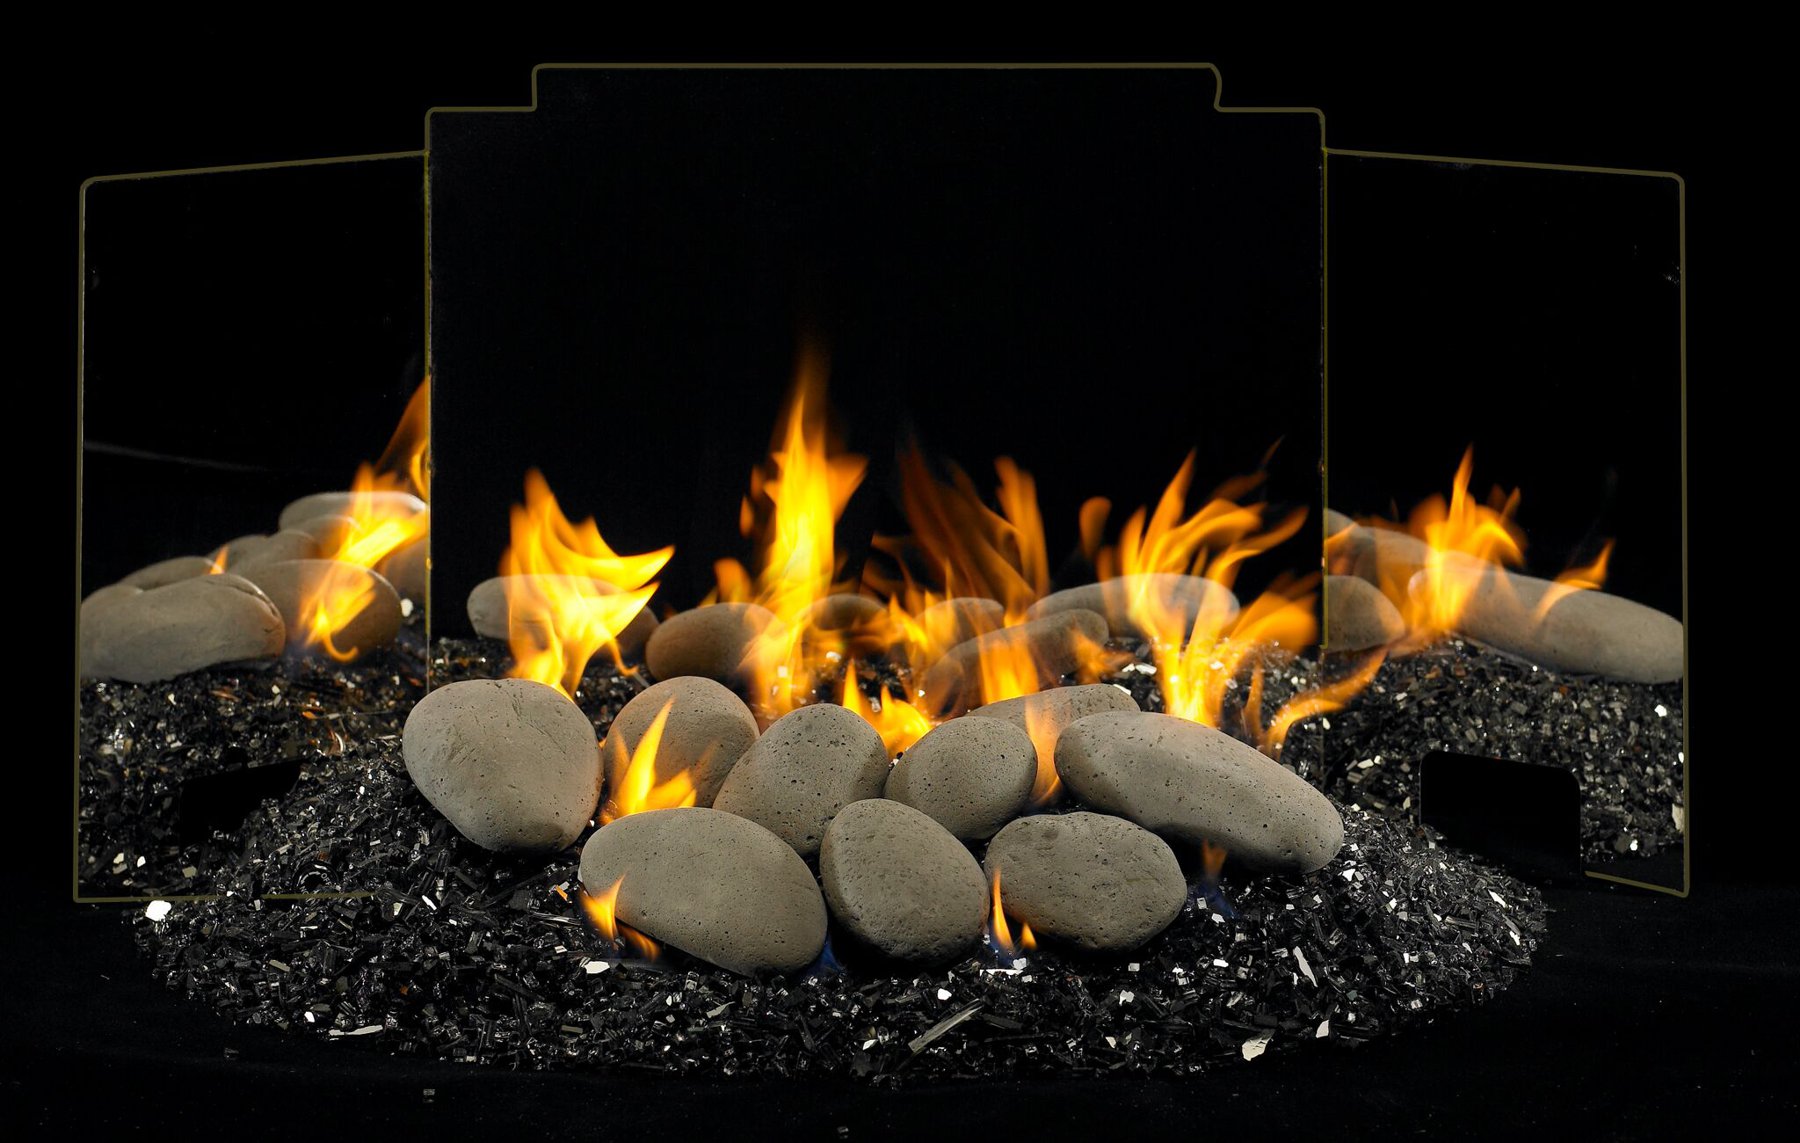 How To Set Up Gas Fireplace With Rocks